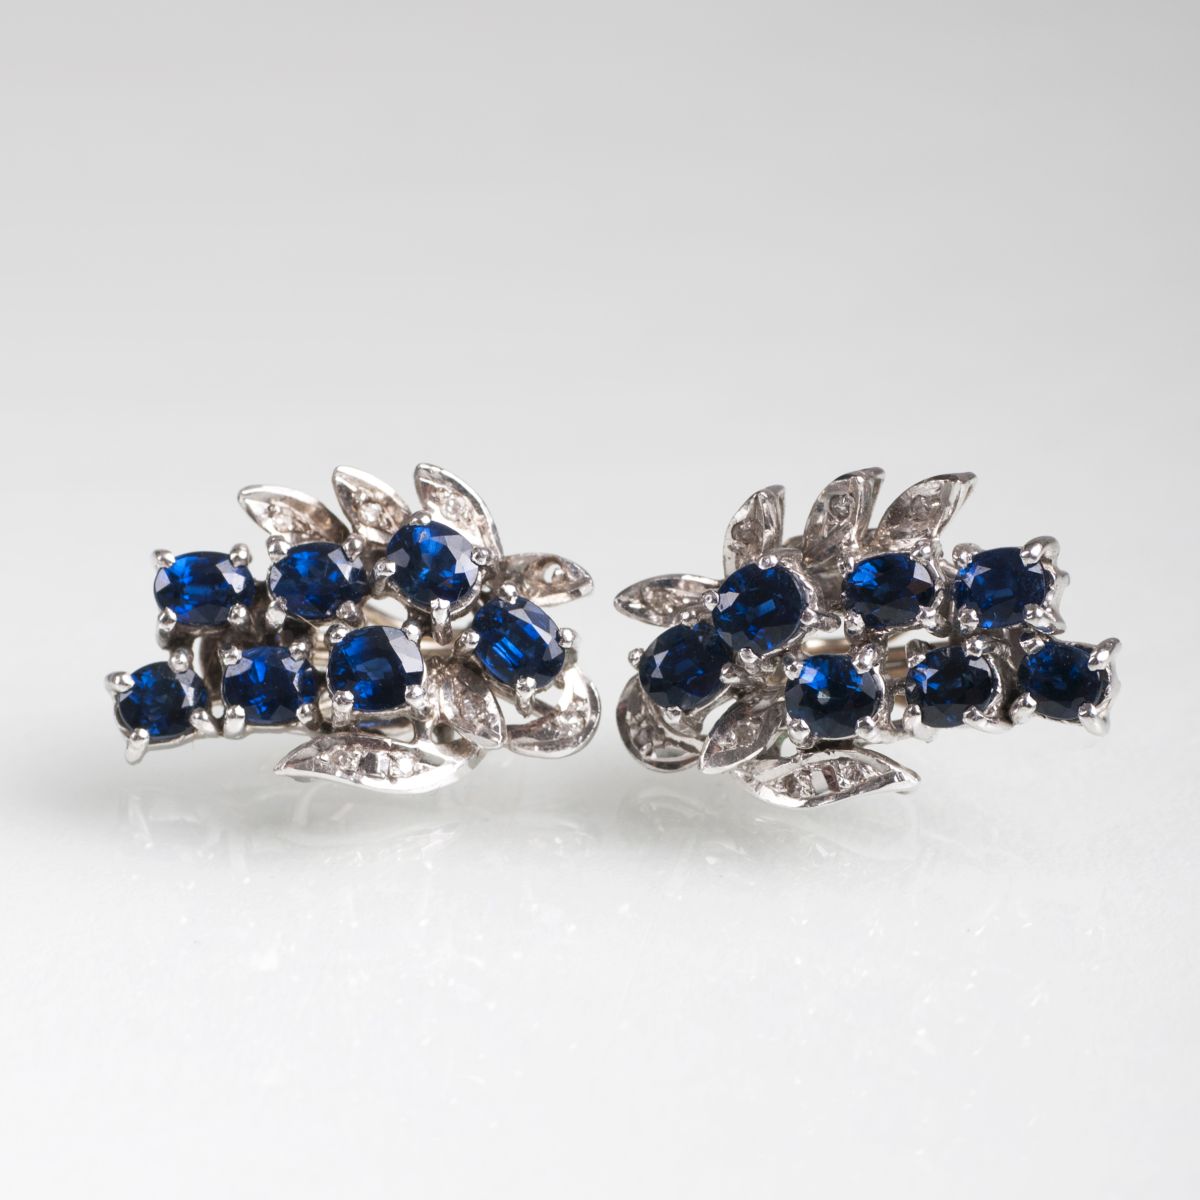 A pair of Vintage sapphire diamond earclips